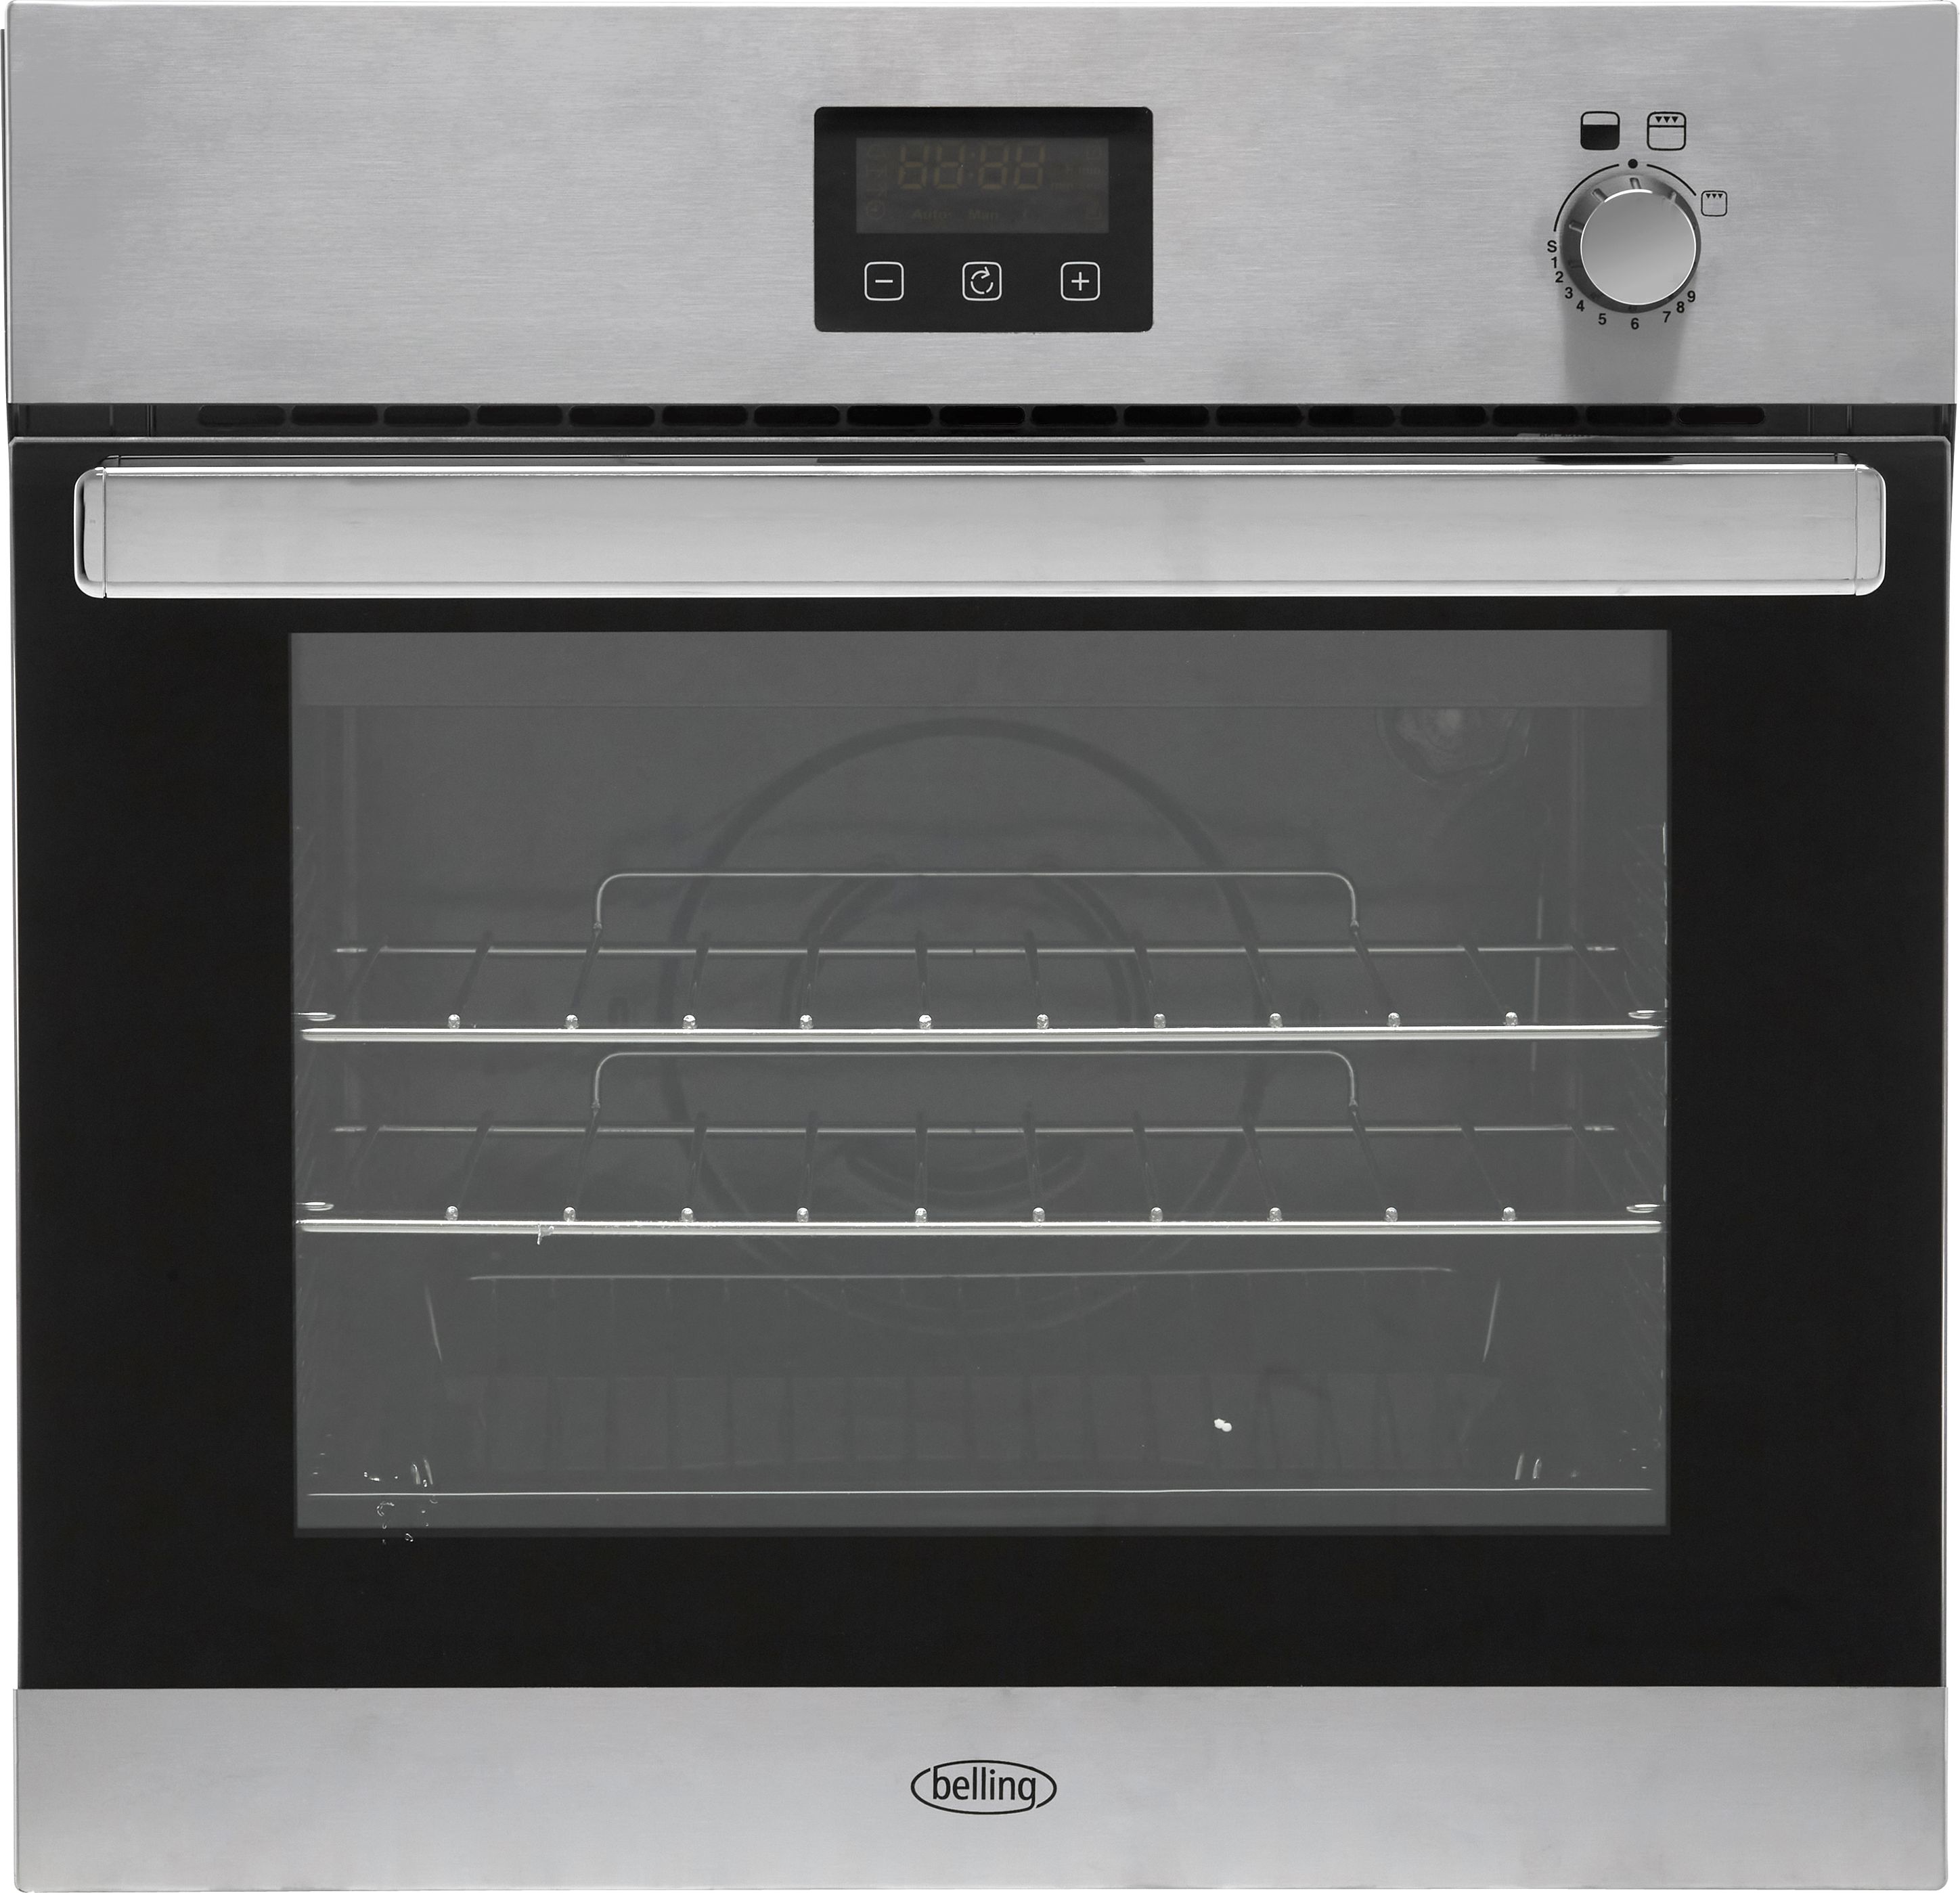 Belling BI602G Built In Gas Single Oven with Full Width Electric Grill - Stainless Steel - A Rated, Stainless Steel